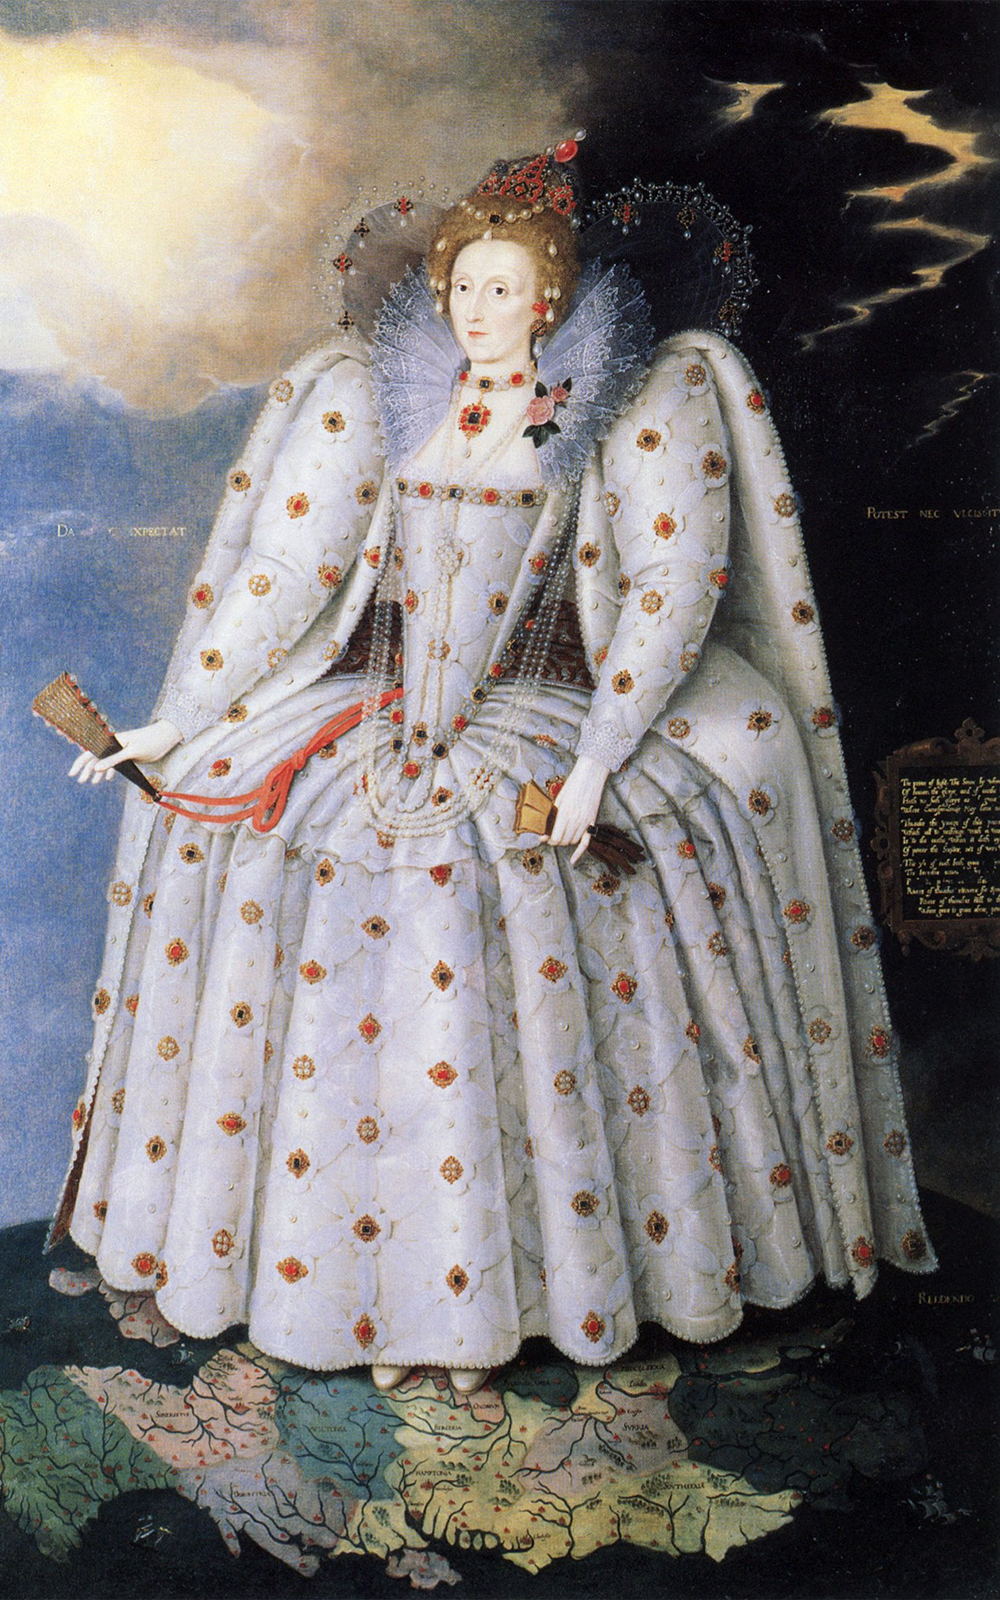 Portrait of Elizabeth I. Her face is painted white and her red hair is piled high in curls, beads and jewels adorning her head. She wears a sumptuous white gown adorned with flowers, her right hand holding a fan and her left holding a pair of gloves. She stands on a map of the world.